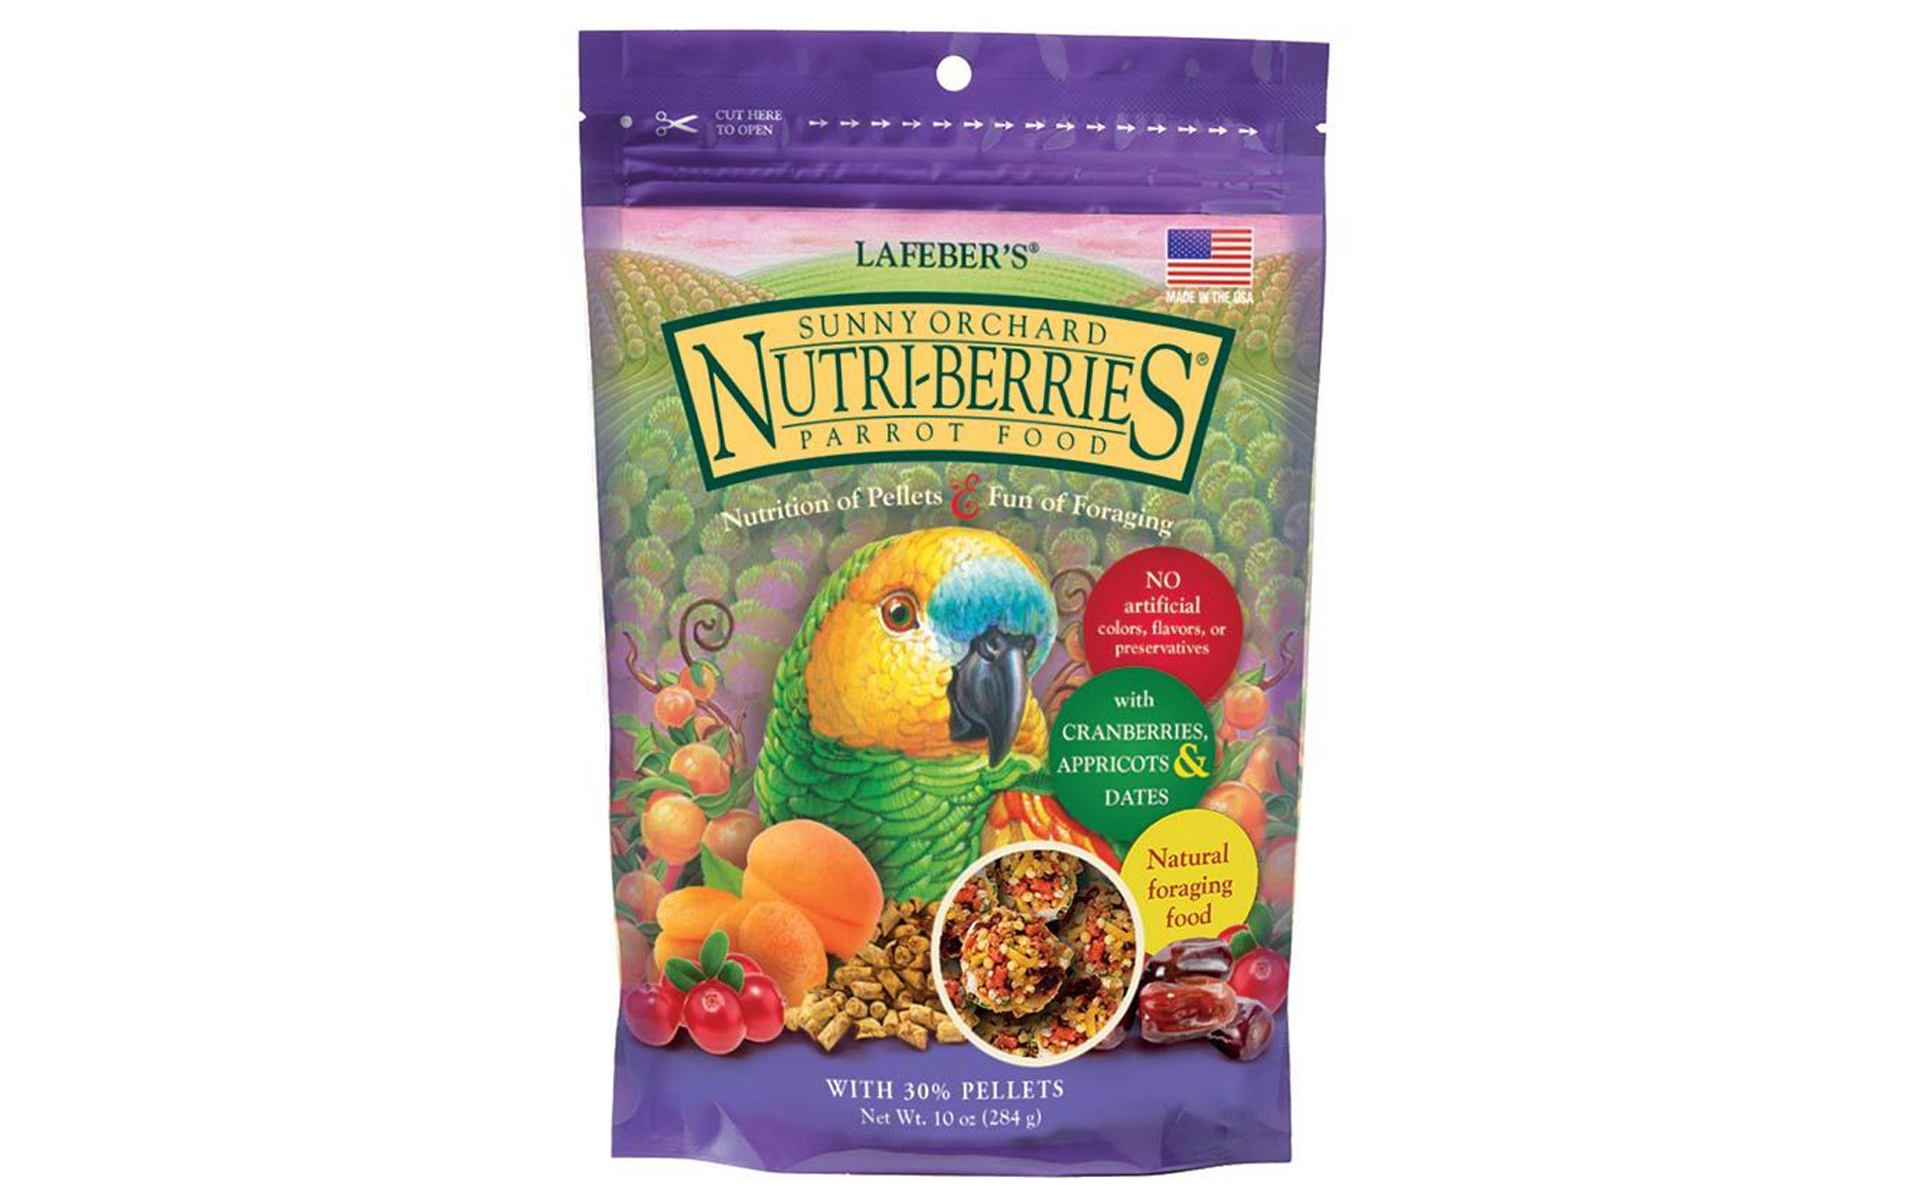 Sunny Orchard Nutri-Berries Parrot Food, 3 lbs